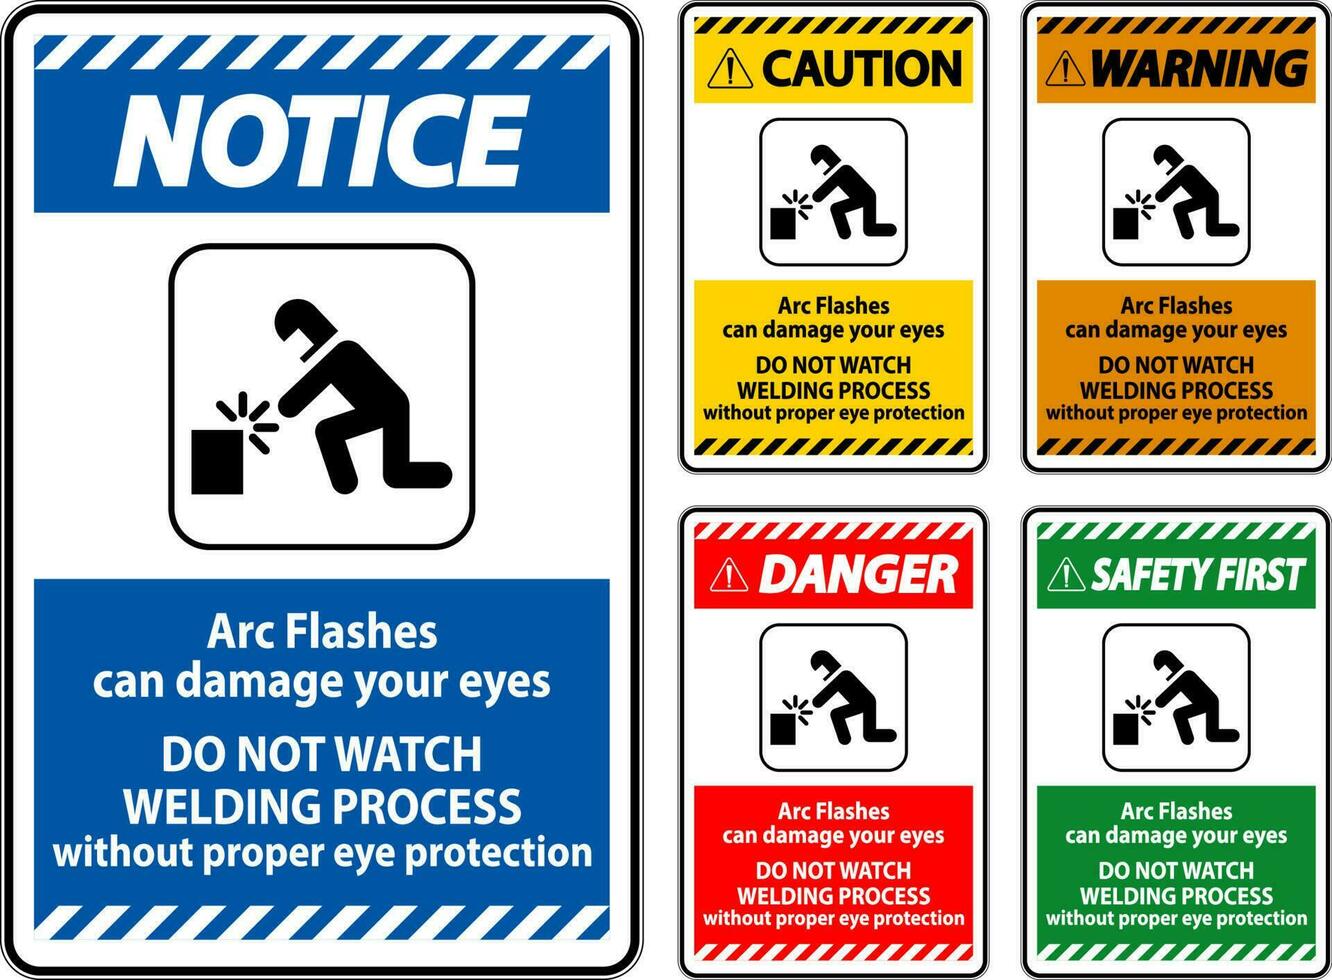 Danger Sign Arc Flashes Can Damage Your Eyes. Do Not Watch Welding Process Without Proper Eye Protection vector